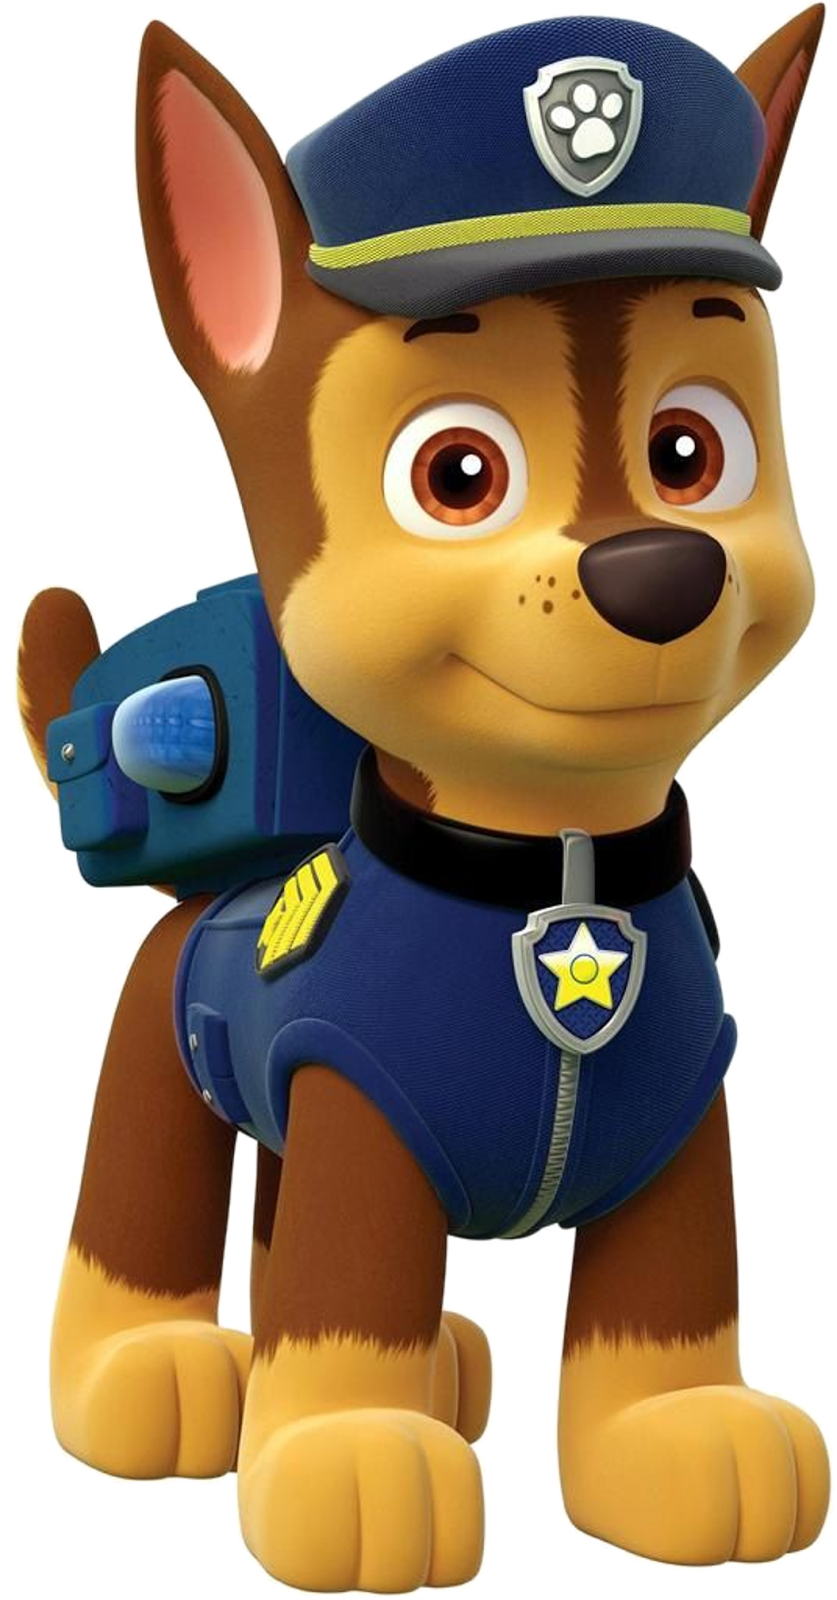 Chase paw patrol by andrewsur